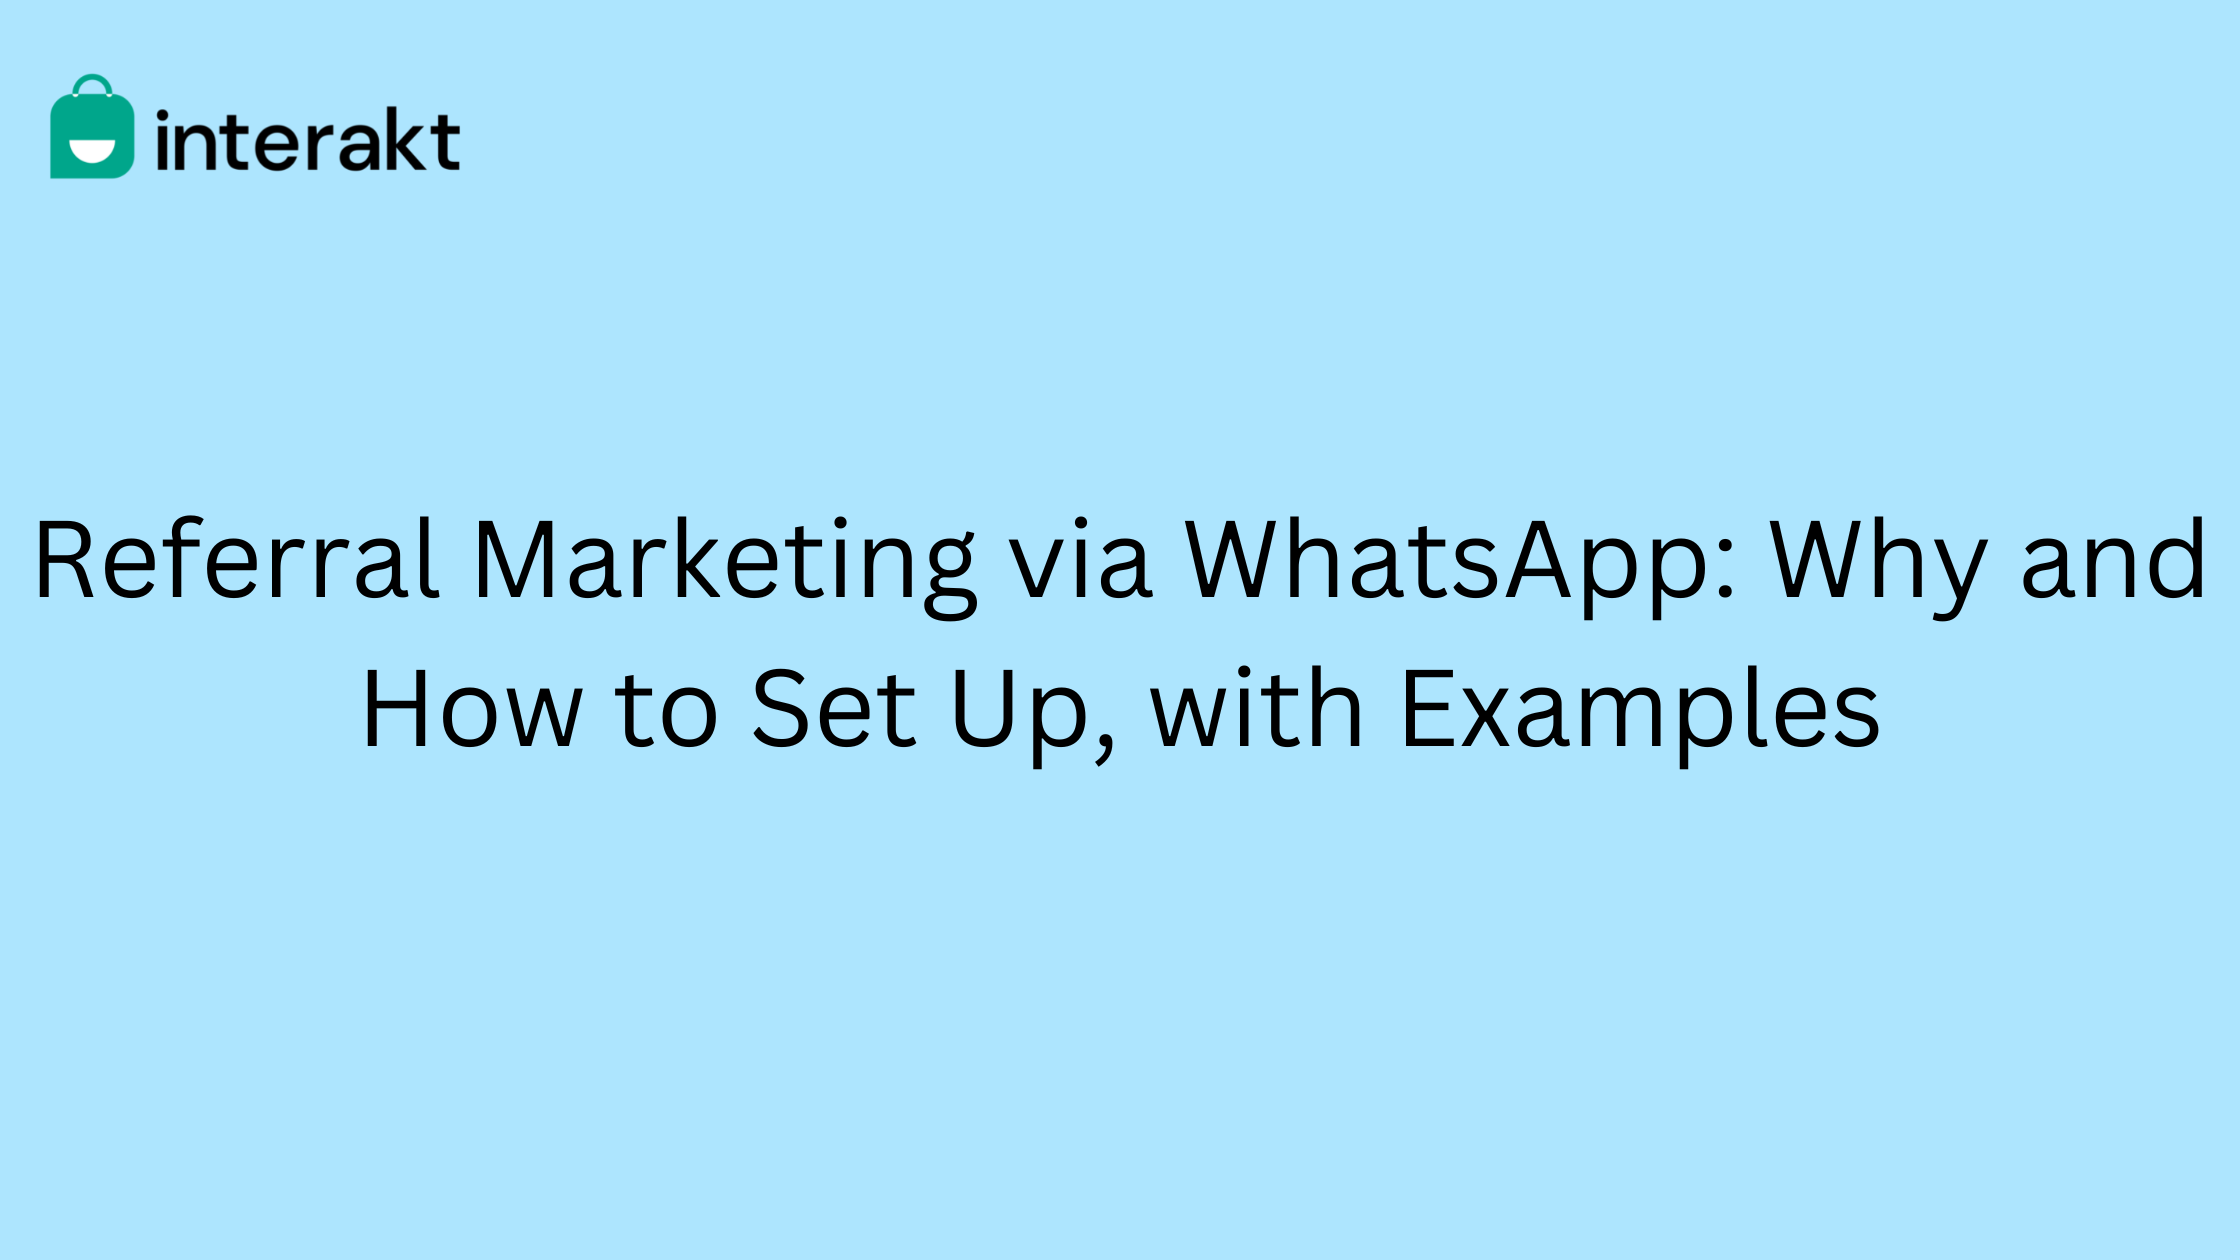 Referral Marketing via WhatsApp Why and How to Set Up with